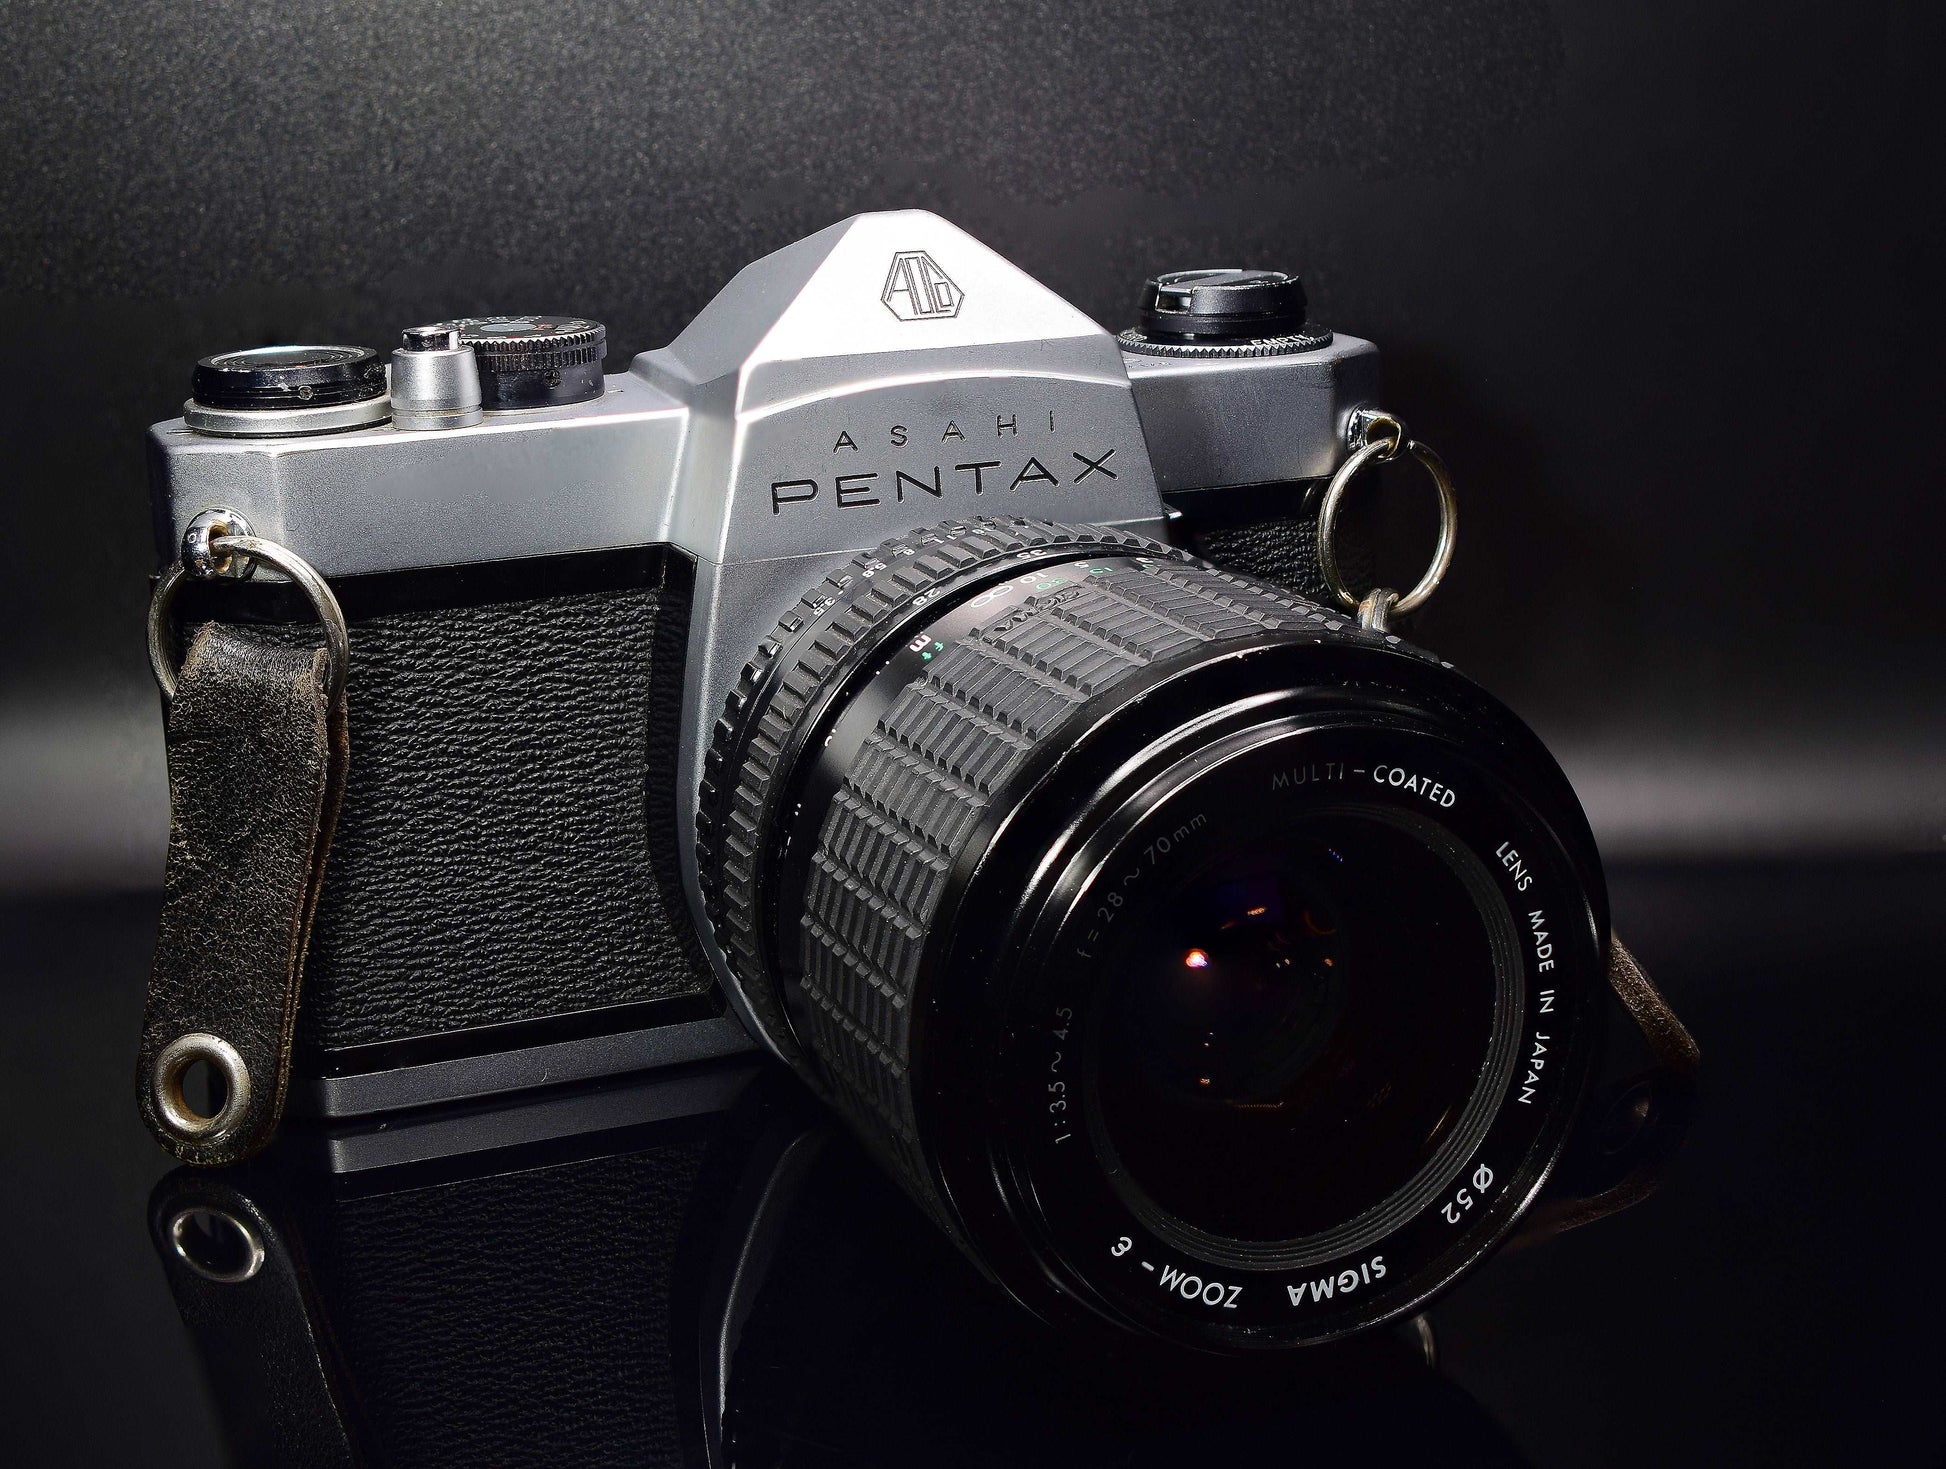 ASAHI Pentax SP1000 35mm Film SLR Camera with SIGMA f/3.5 28-70mm Zoom Lens and Detachable Cold Shoe Attachment